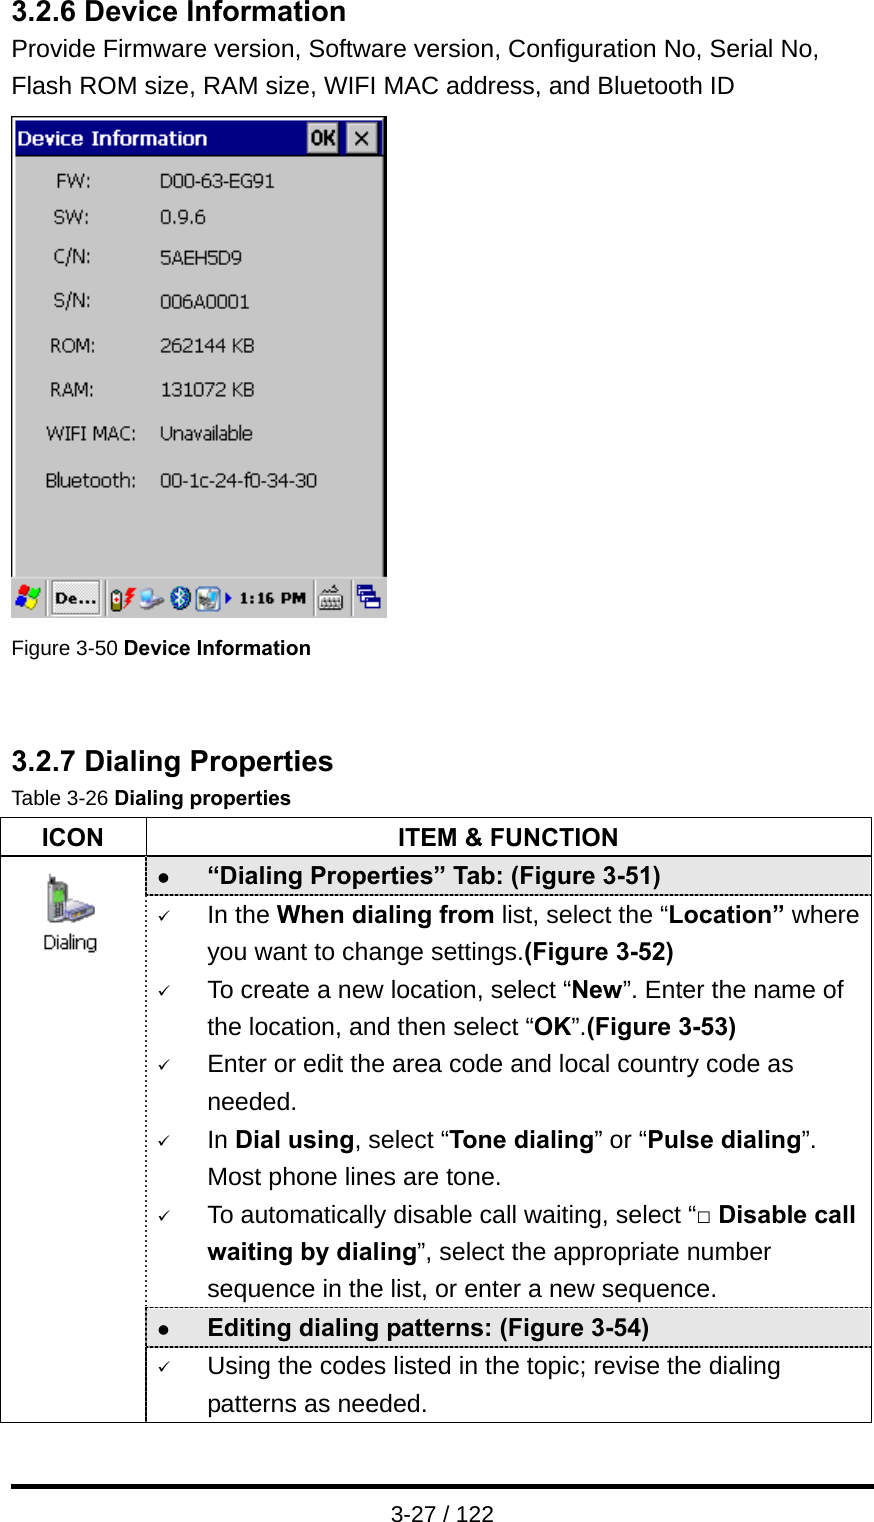  3-27 / 122 3.2.6 Device Information Provide Firmware version, Software version, Configuration No, Serial No, Flash ROM size, RAM size, WIFI MAC address, and Bluetooth ID  Figure 3-50 Device Information   3.2.7 Dialing Properties Table 3-26 Dialing properties ICON  ITEM &amp; FUNCTION z “Dialing Properties” Tab: (Figure 3-51) 9 In the When dialing from list, select the “Location” where you want to change settings.(Figure 3-52) 9 To create a new location, select “New”. Enter the name of the location, and then select “OK”.(Figure 3-53) 9 Enter or edit the area code and local country code as needed. 9 In Dial using, select “Tone dialing” or “Pulse dialing”. Most phone lines are tone. 9 To automatically disable call waiting, select “□ Disable call waiting by dialing”, select the appropriate number sequence in the list, or enter a new sequence. z Editing dialing patterns: (Figure 3-54)              9 Using the codes listed in the topic; revise the dialing patterns as needed. 